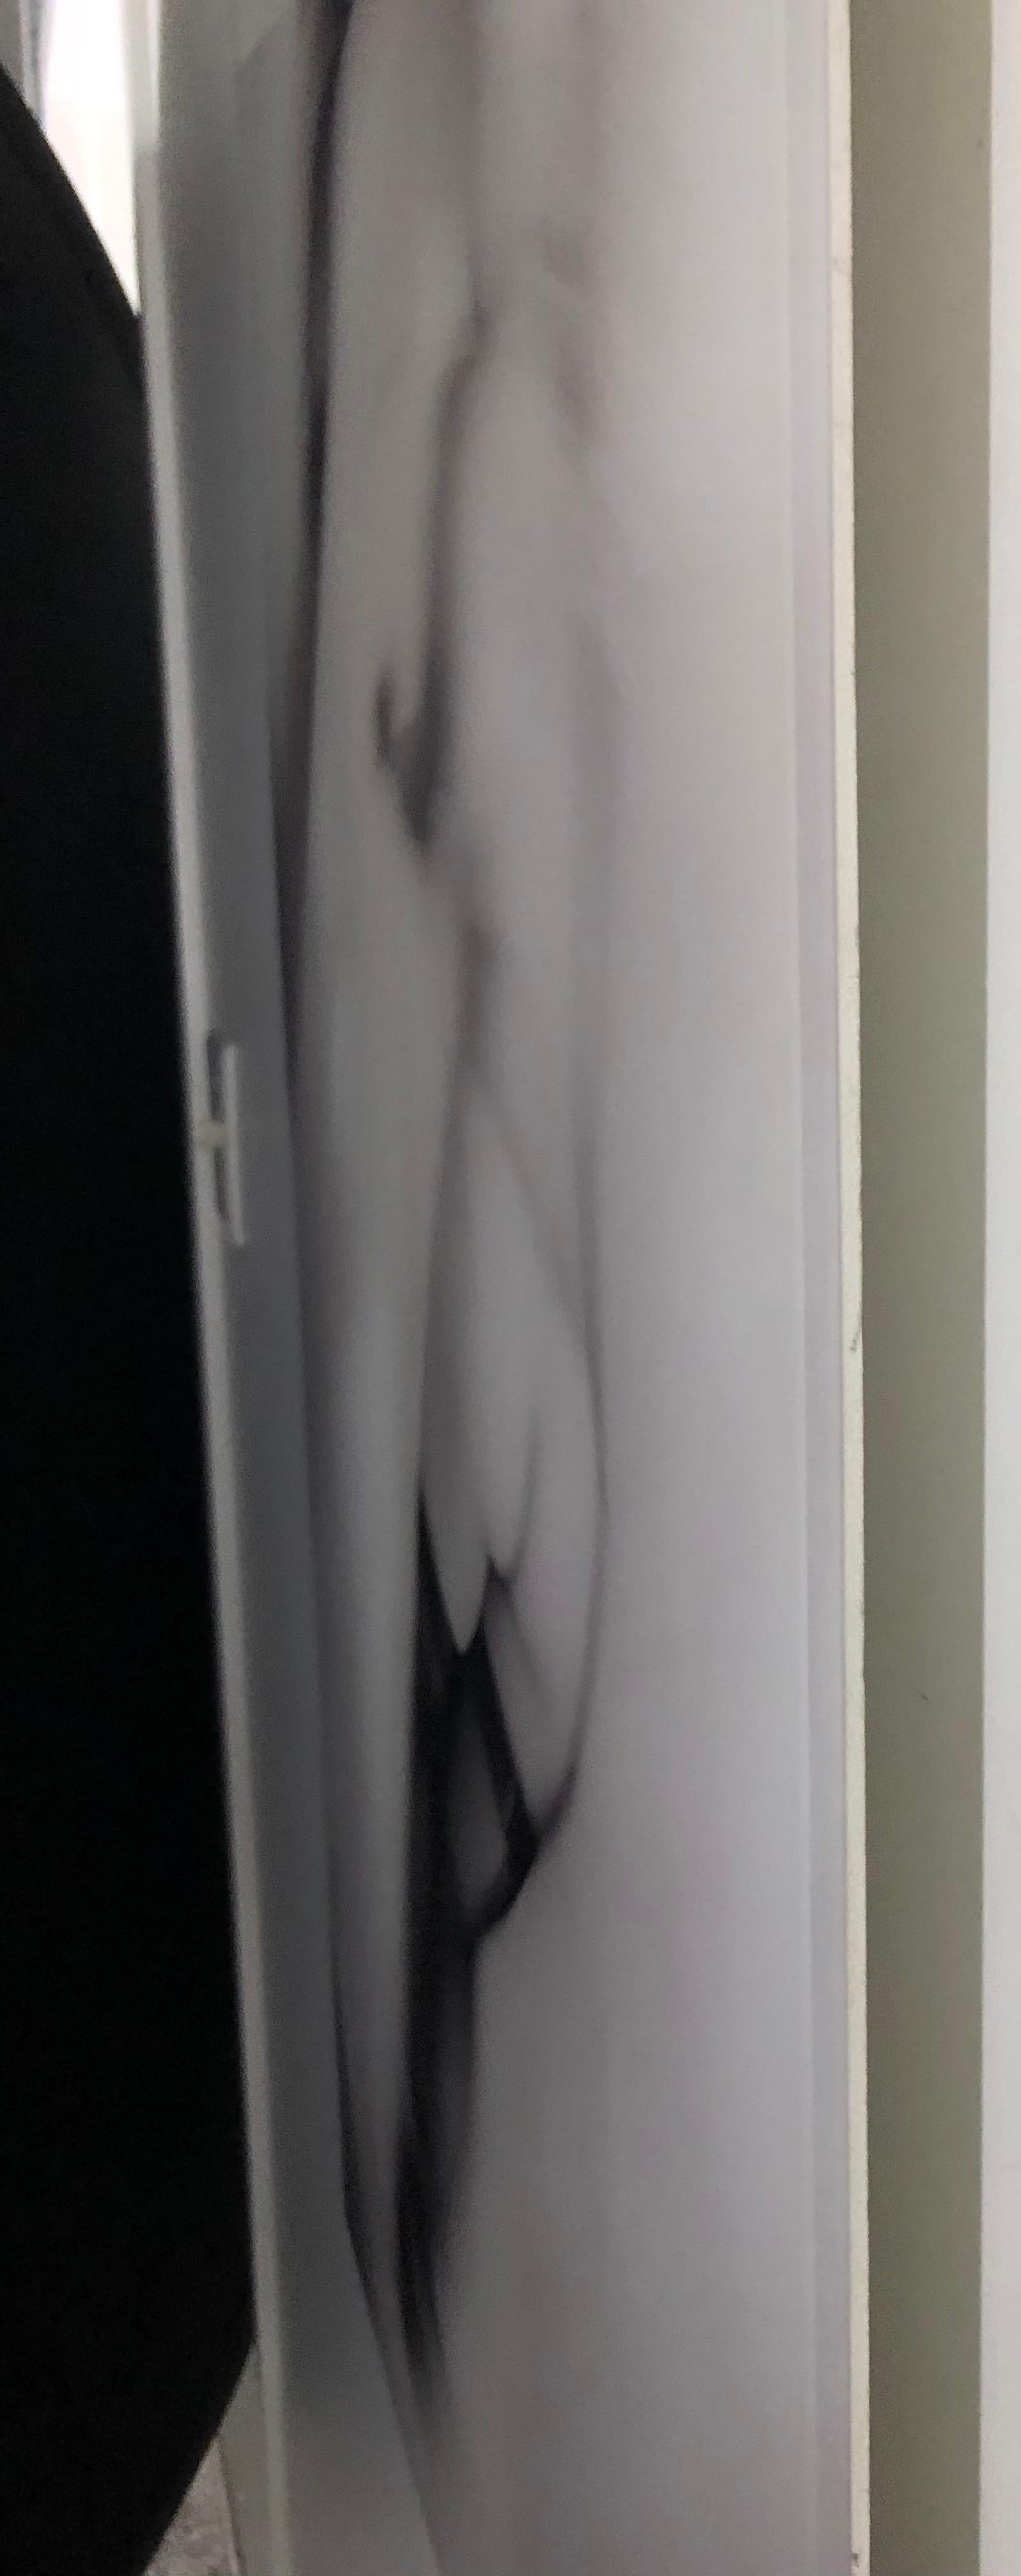 Nude Woman Photography Print on Plexiglass, Limited Edition, Signed For Sale 6